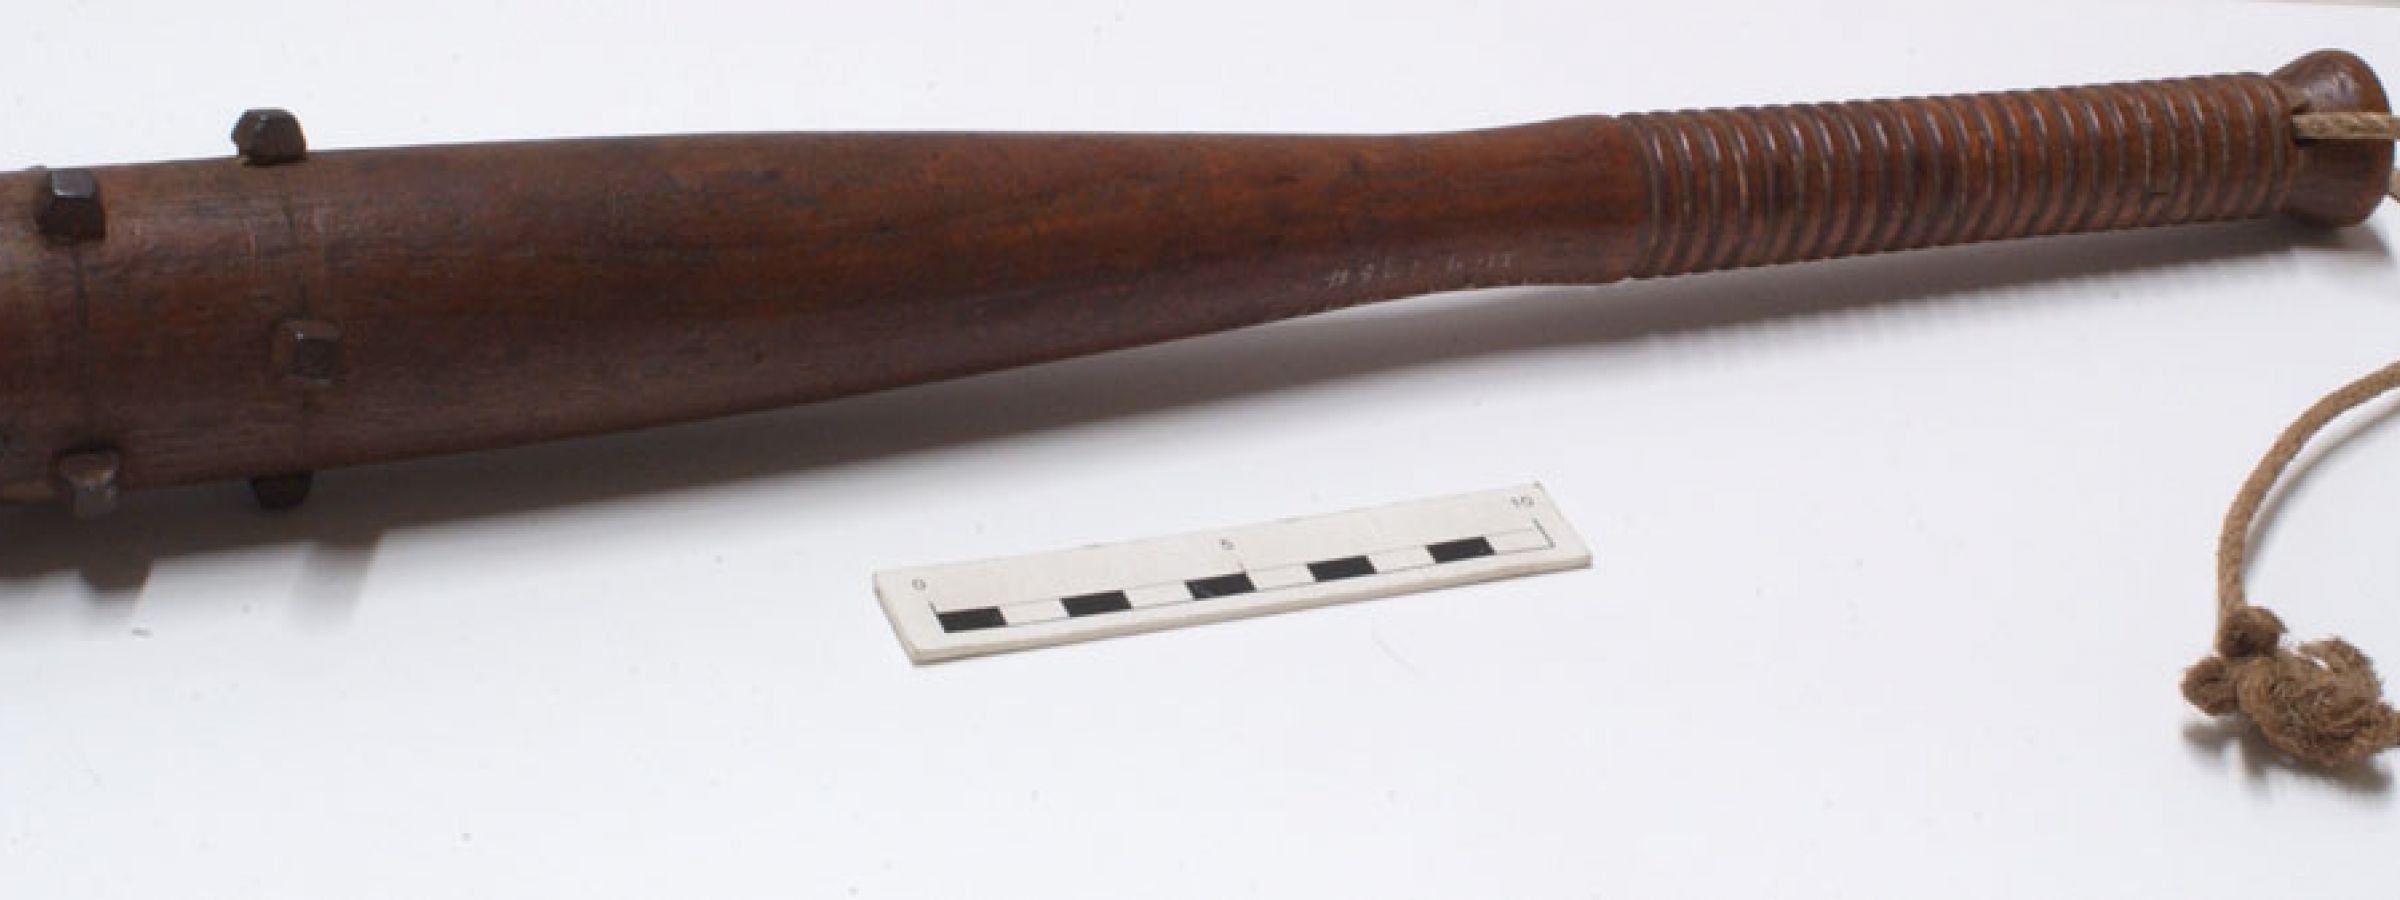 An example of the type of weapon used during a raid - a German trench club studded with nails.